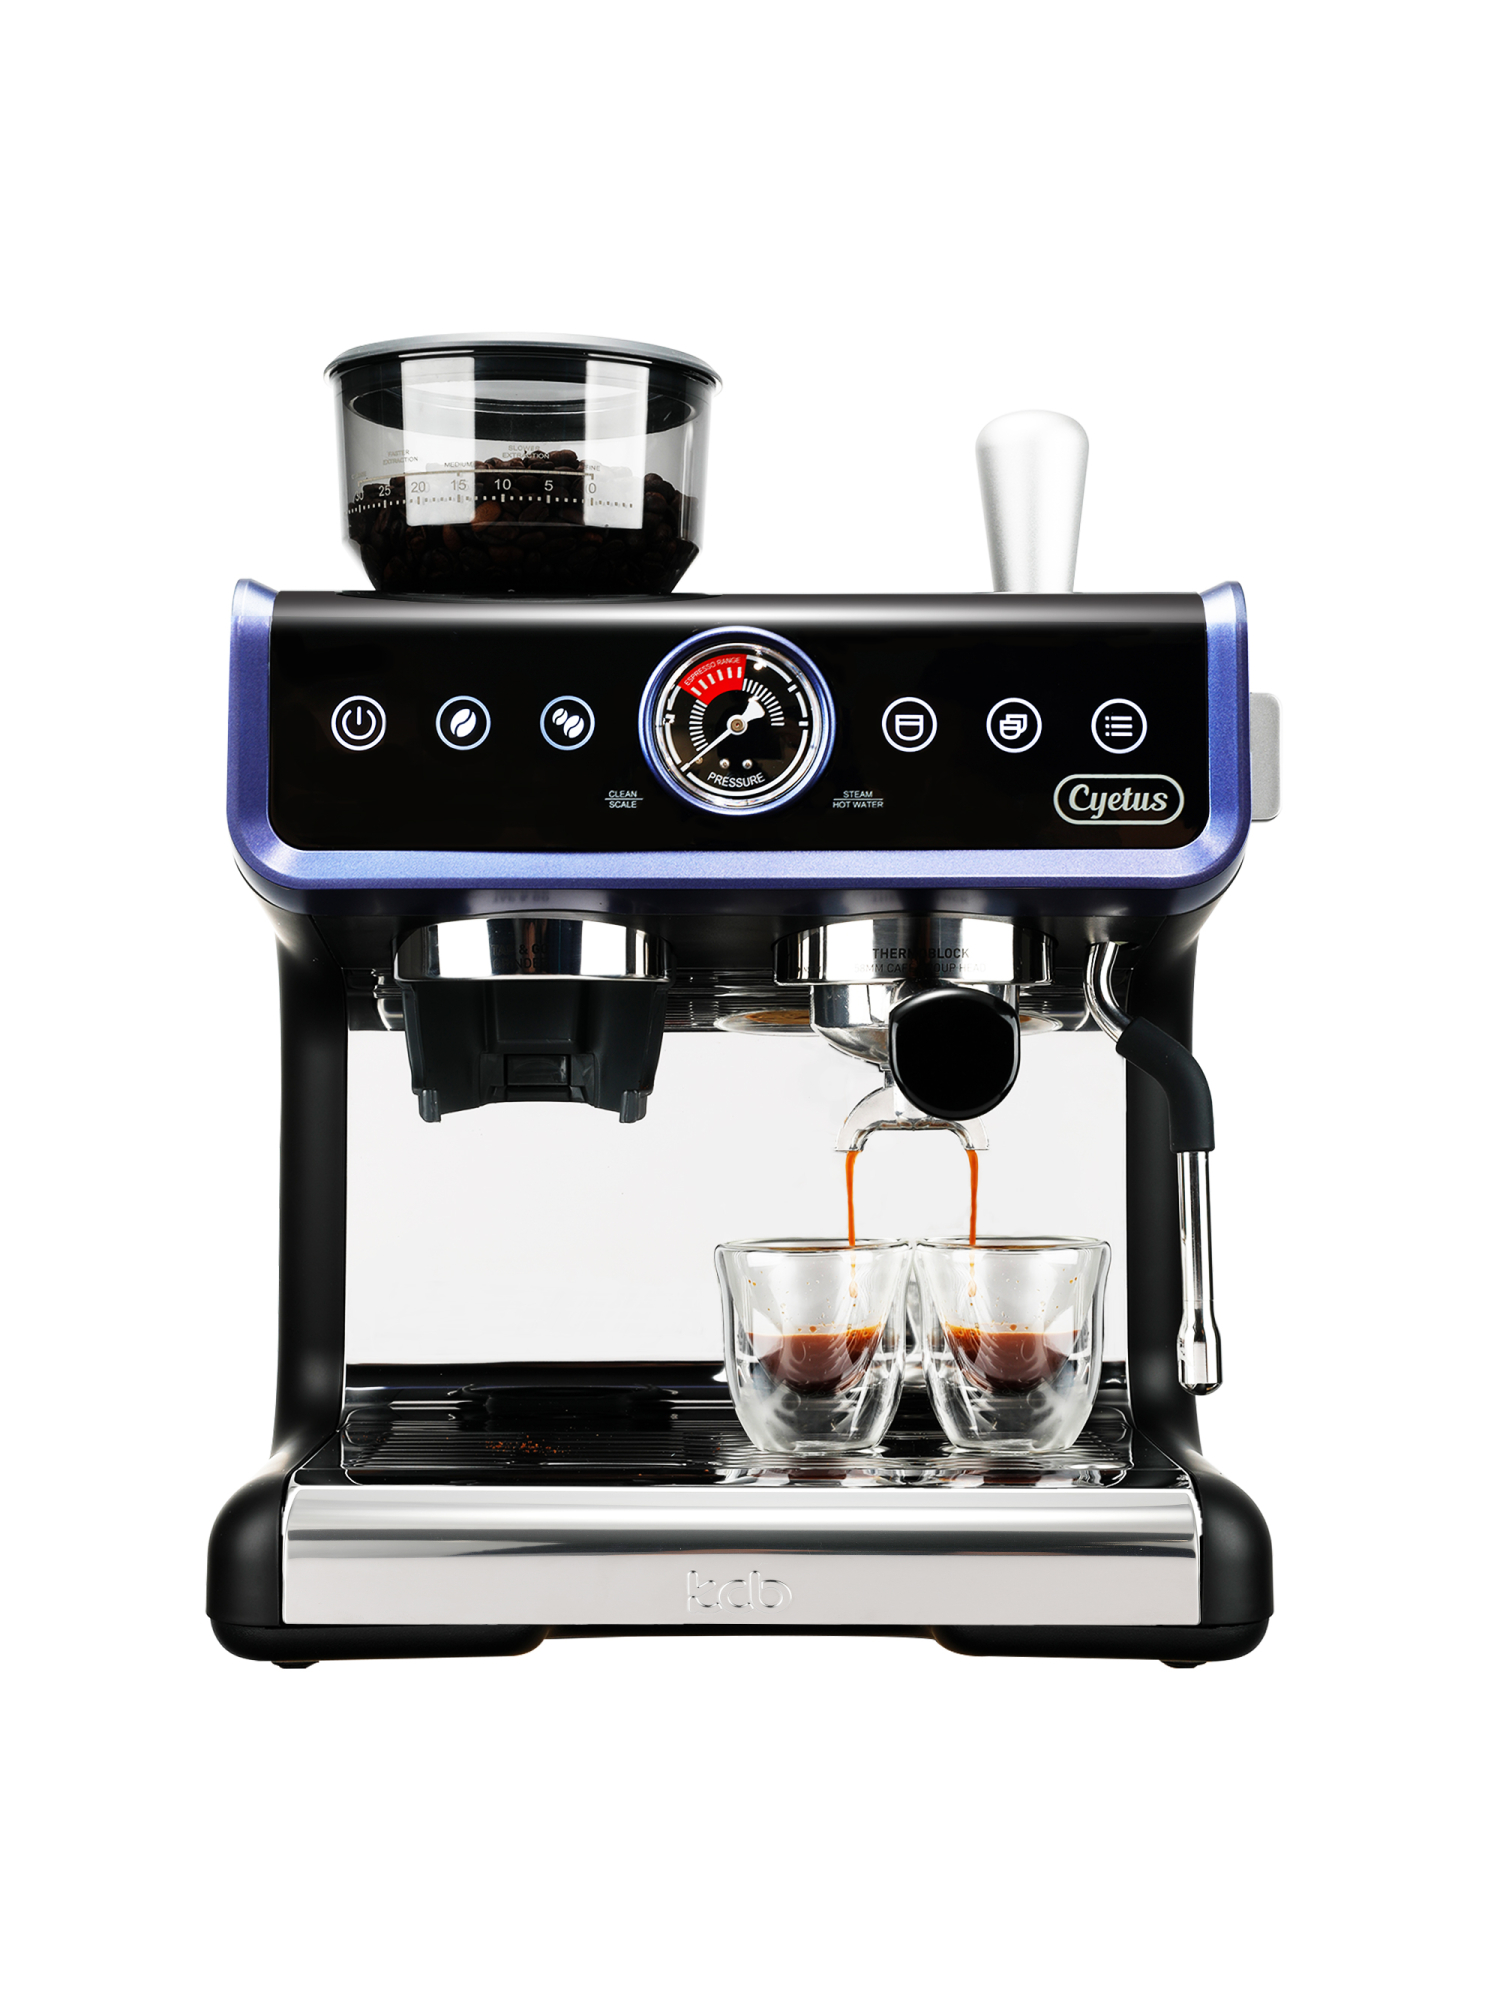 CYETUS All in One Espresso Machine for Home Barista CYK7601, Coffee Grinder, Milk Steam Frother Wand, for Espresso